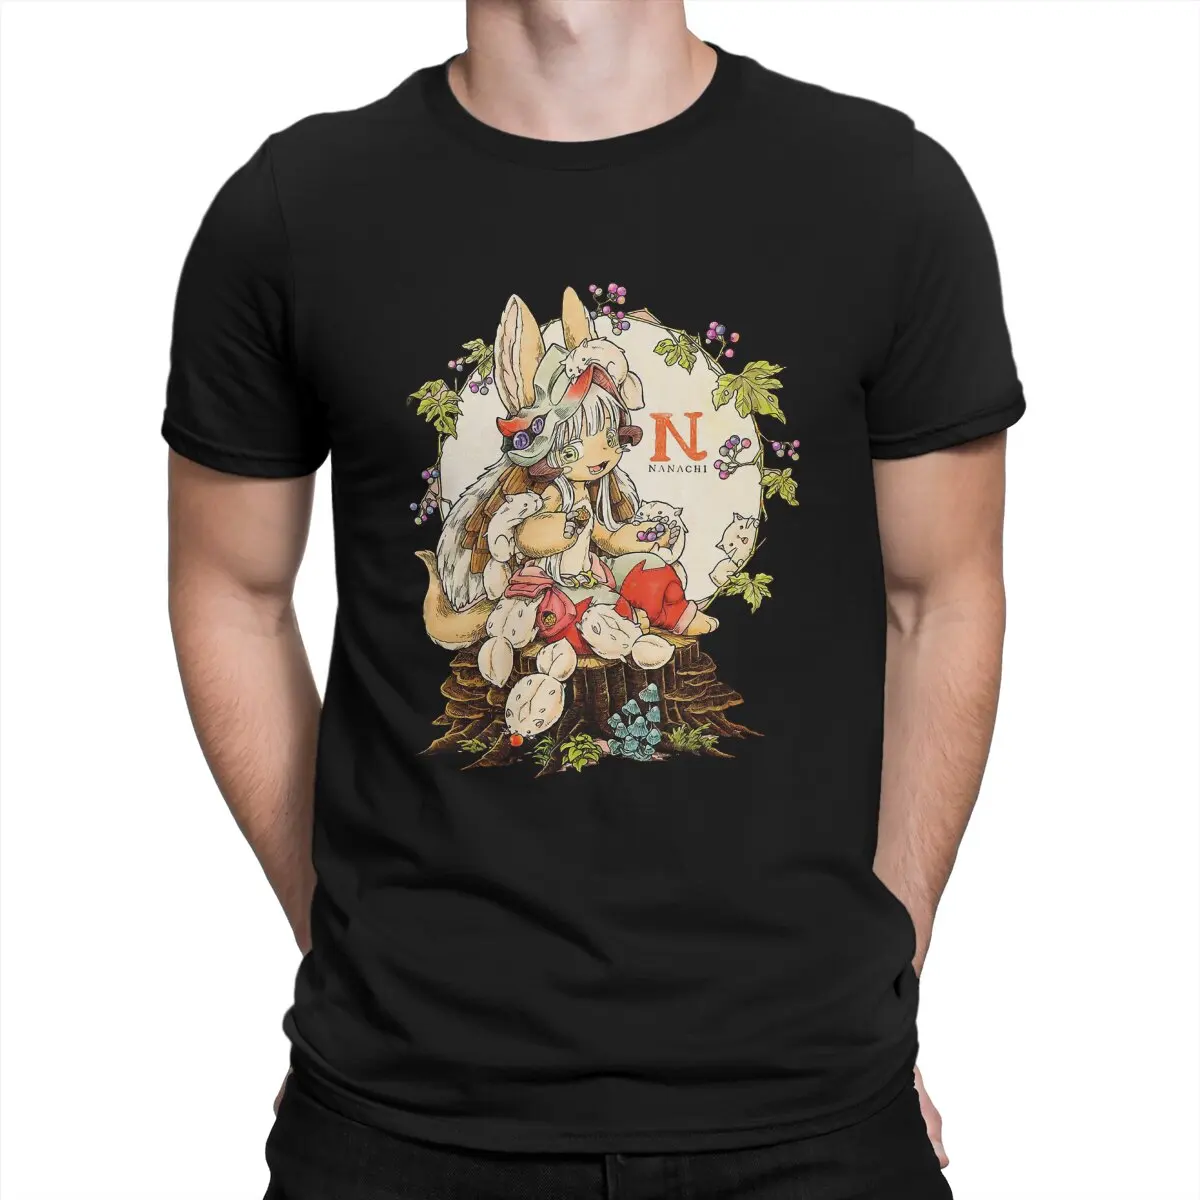 

Nanachi and Cutie Animals T-Shirt for Men Made In Abyss Novelty Cotton Tee Shirt O Neck Short Sleeve T Shirt Printing Clothing